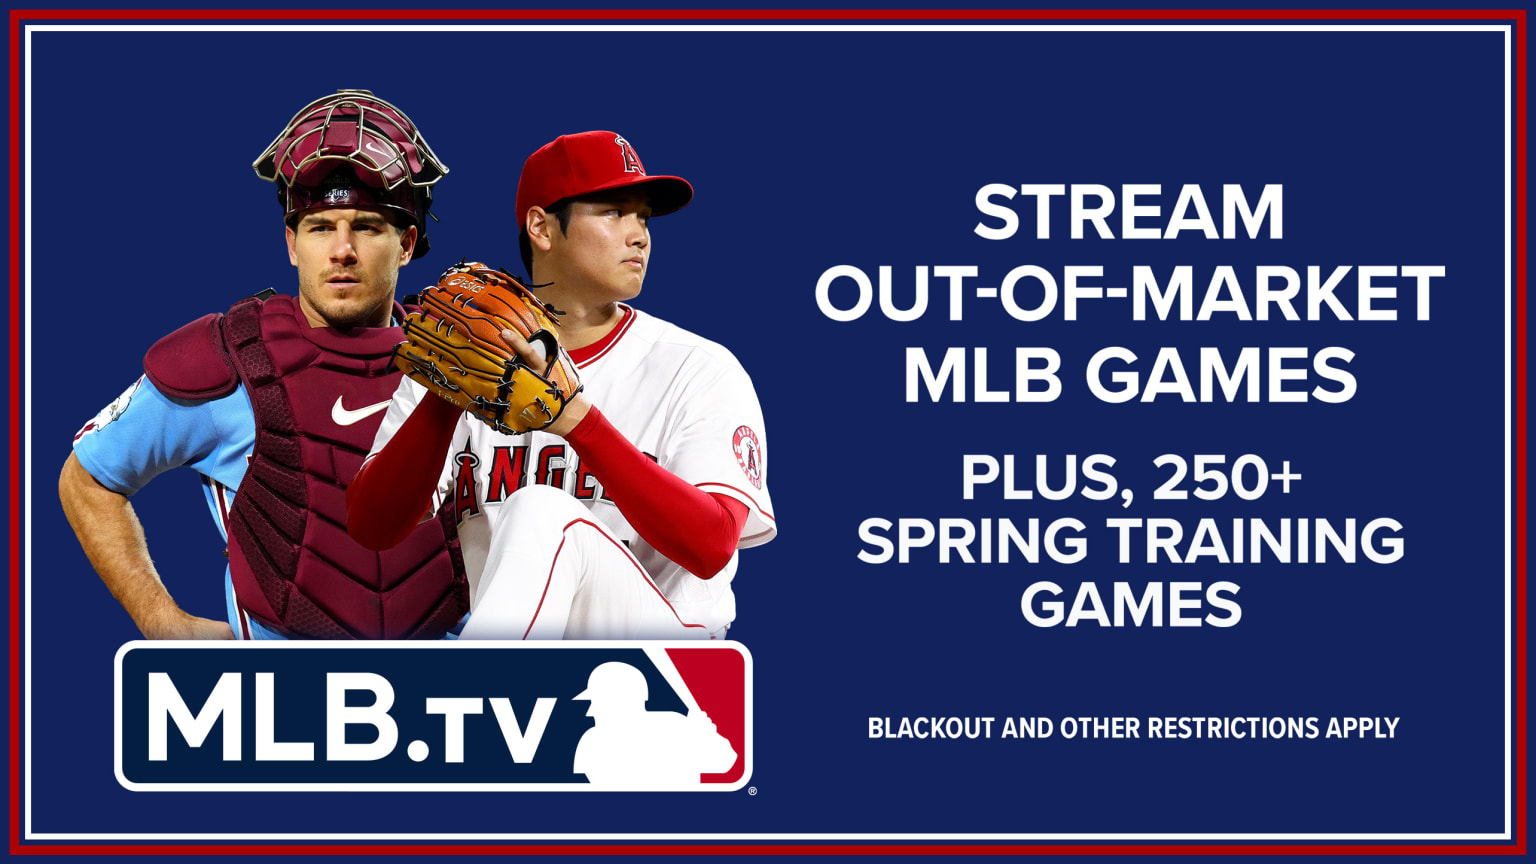 A graphic showing a catcher and a pitcher over an MLB.TV logo and text on the right reading, ''STREAM OUT-OF-MARKET MLB GAMES. PLUS, 250+ SPRING TRAINING GAMES''